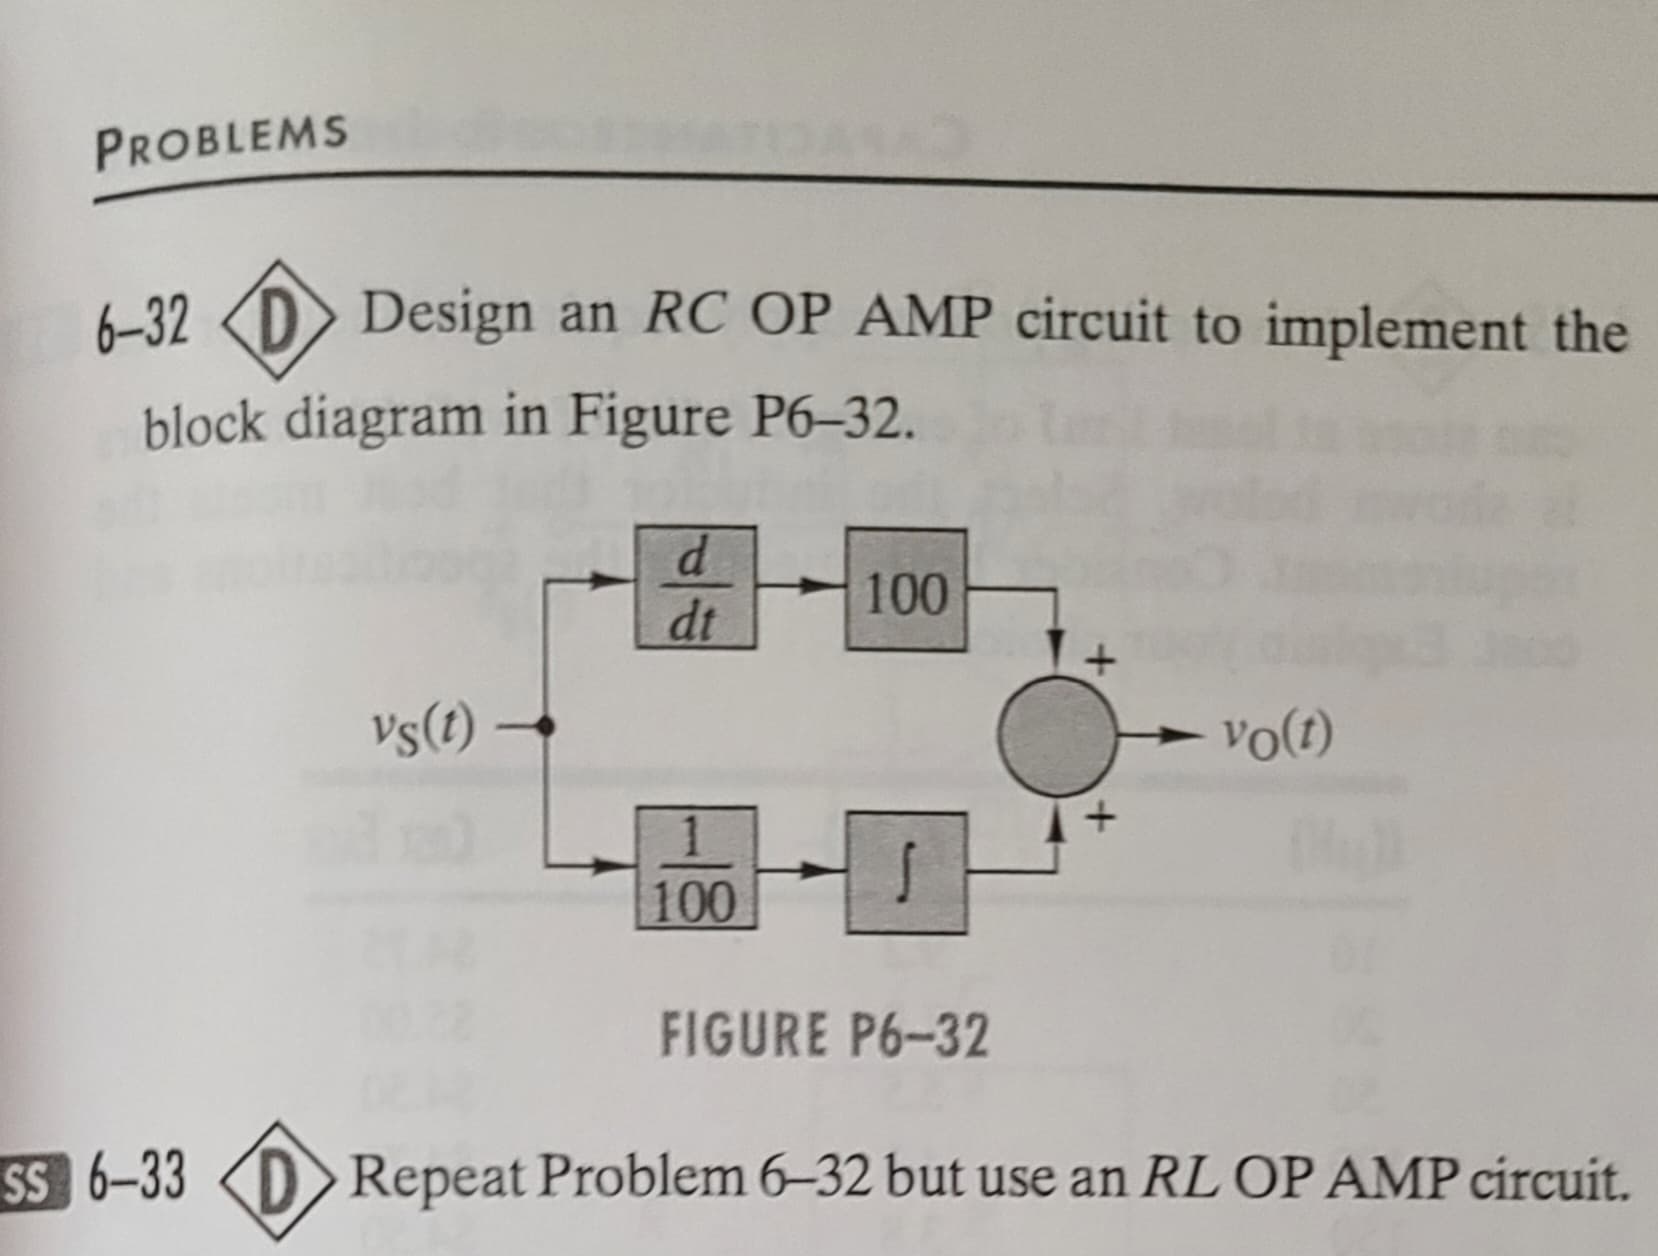 PROBLEMS
6-32
block diagram in Figure P6-32.
Design an RC OP AMP circuit to implement the
SS 6-33
vs(t) →
d
dt
100
100
[]
FIGURE P6-32
vo(t)
Ou
Repeat Problem 6-32 but use an RL OP AMP circuit.